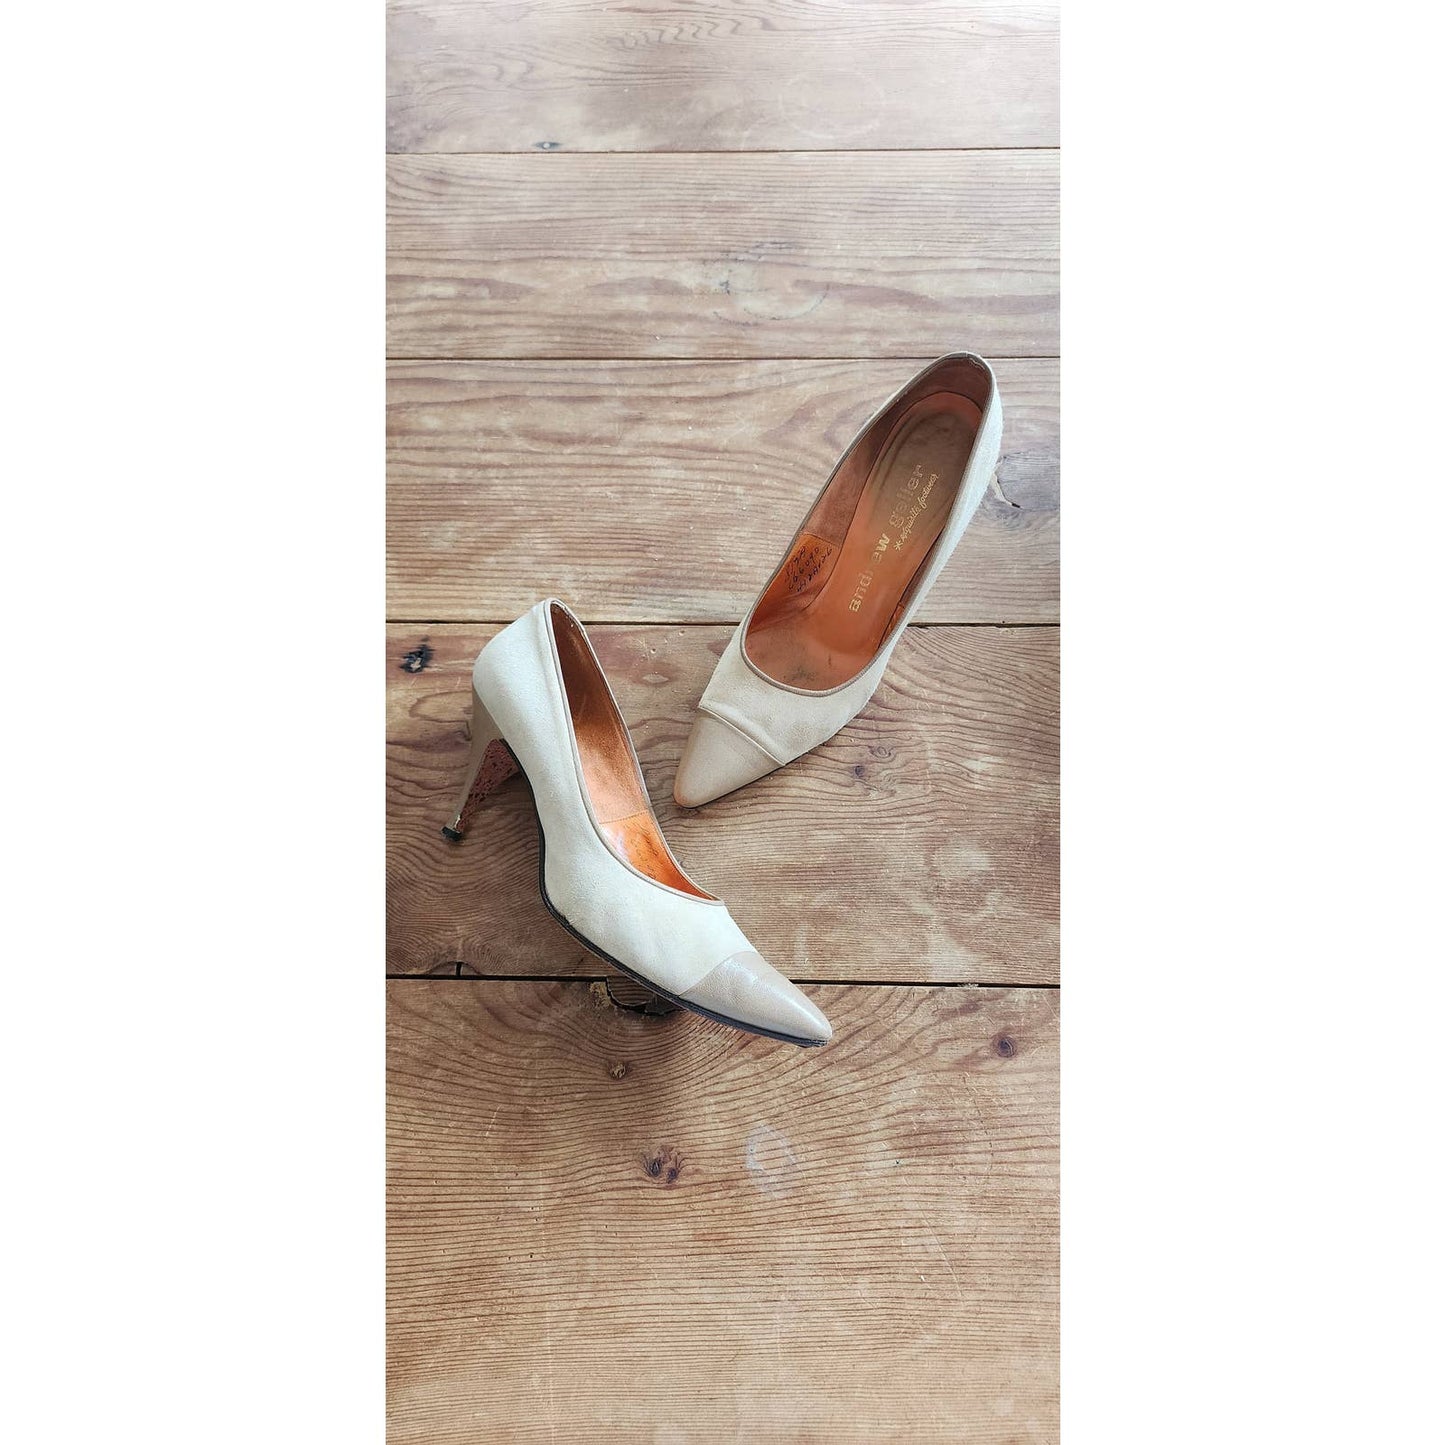 Vintage 50s Beige Shoes High Heels Pointy Toe Andrew Geller Two Toned 8.5